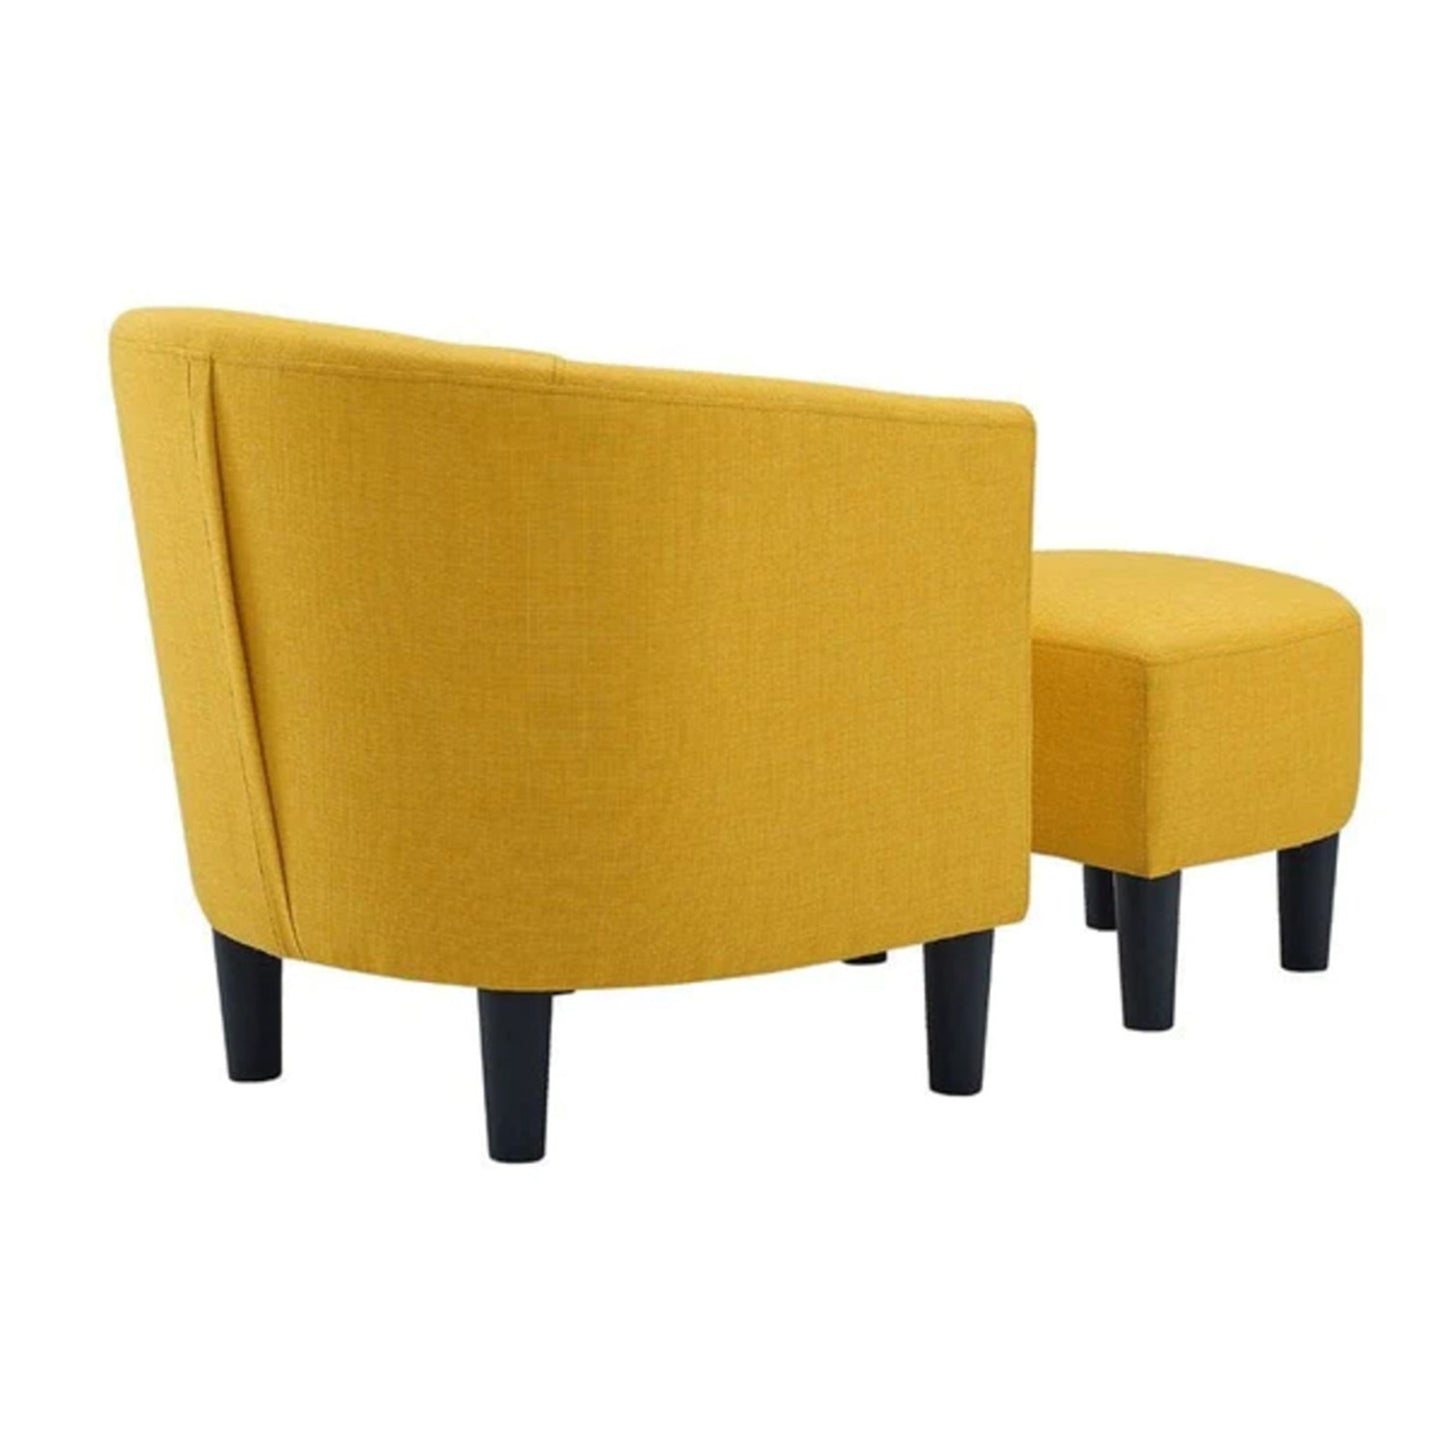 Sleek Accent Chairs With Ottomans Footrest Yellow